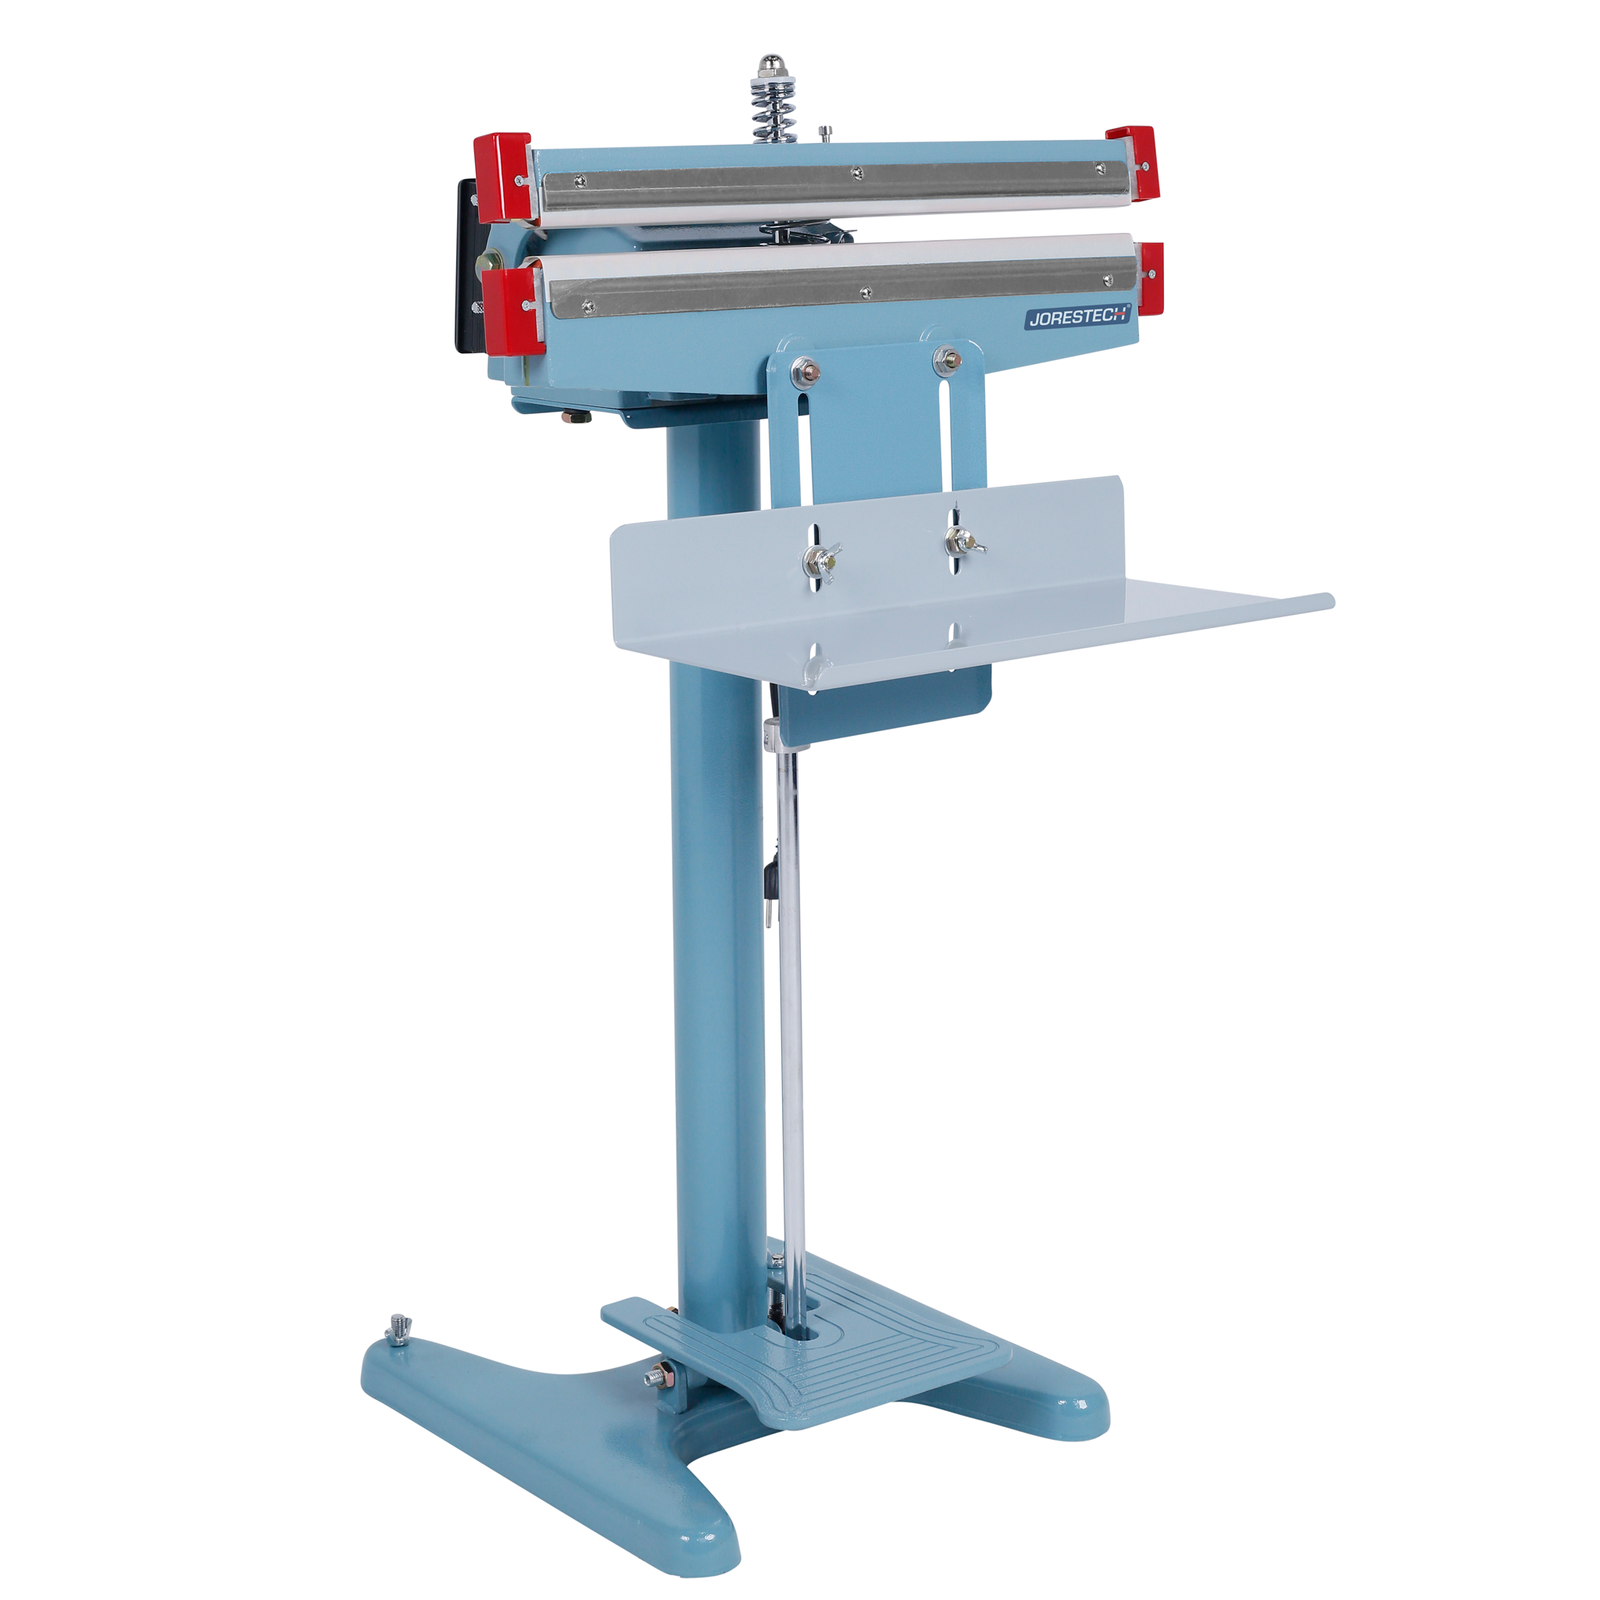 Blue 18 inch double heat foot impulse sealer over white background. Bag sealer is shown with open double sealing jaw and JORES TECHNOLOGIES® logo.